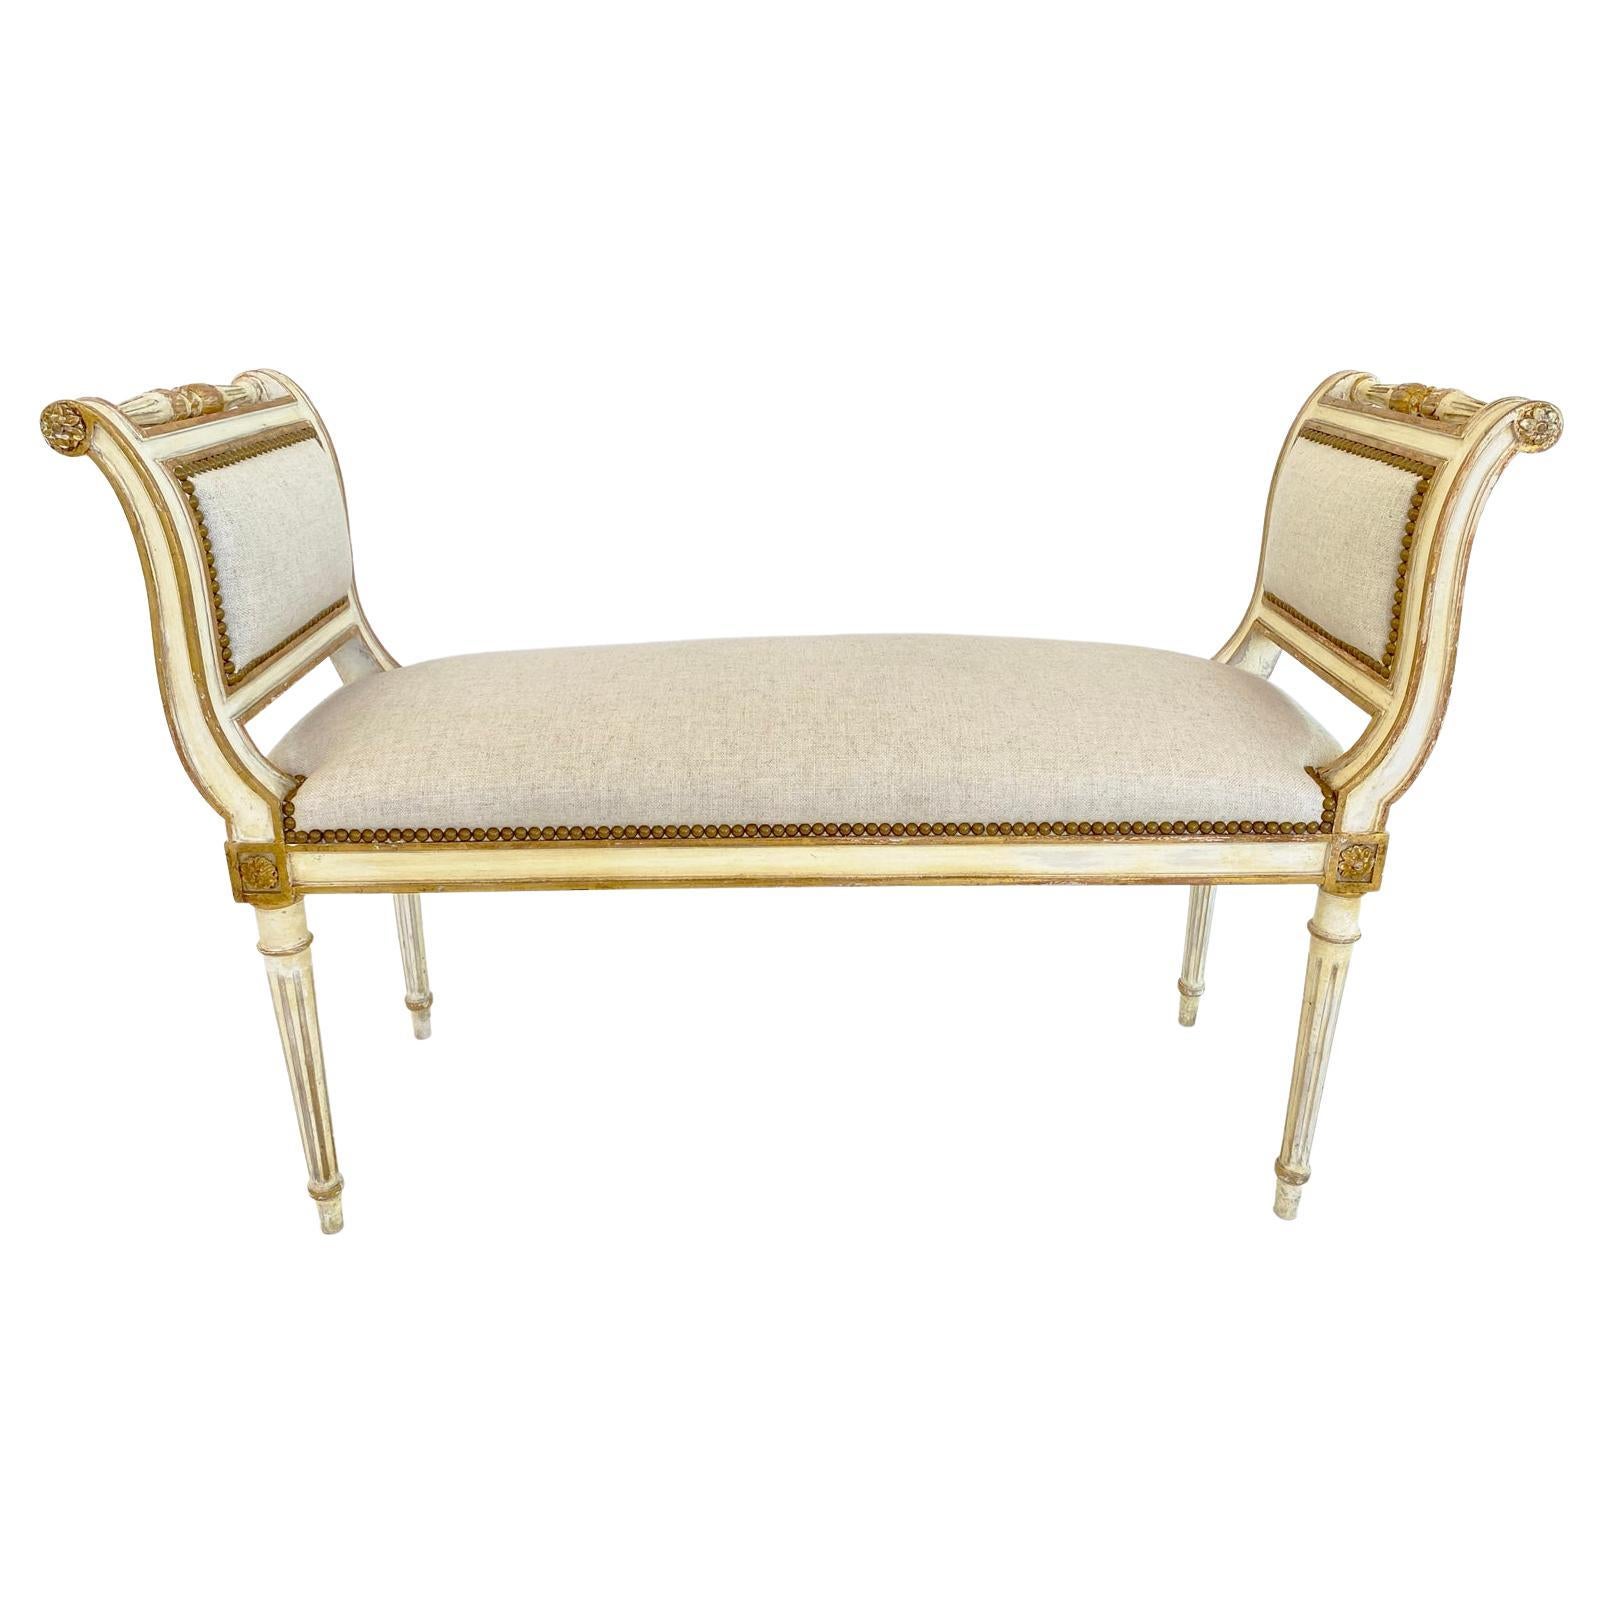 Painted and Parcel Gilt Louis XVI Style Window Seat Bench